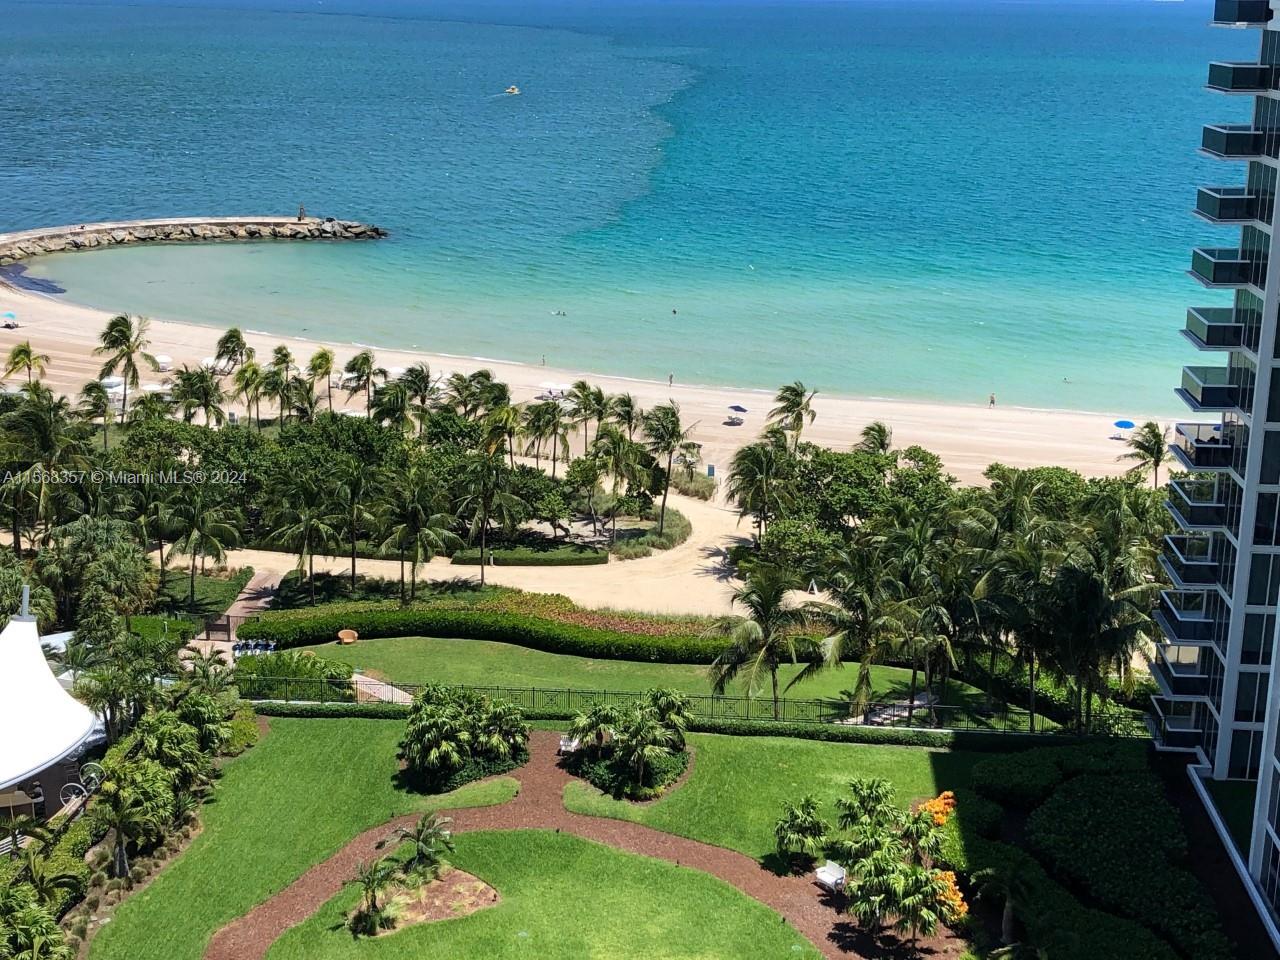 Breathtaking views from this 2/2 remodeled unit in Bal Harbour. This unit has stunning ocean views and is on the left wing of the building which is closest to the Ritz Hotel avoiding the noise from the pool. Marble floors thru-out, completely furnished with high-end furniture. **2 parking spaces included** washer/dryer inside unit. Looking for 6-12 month lease. Easy to show. Please call LA